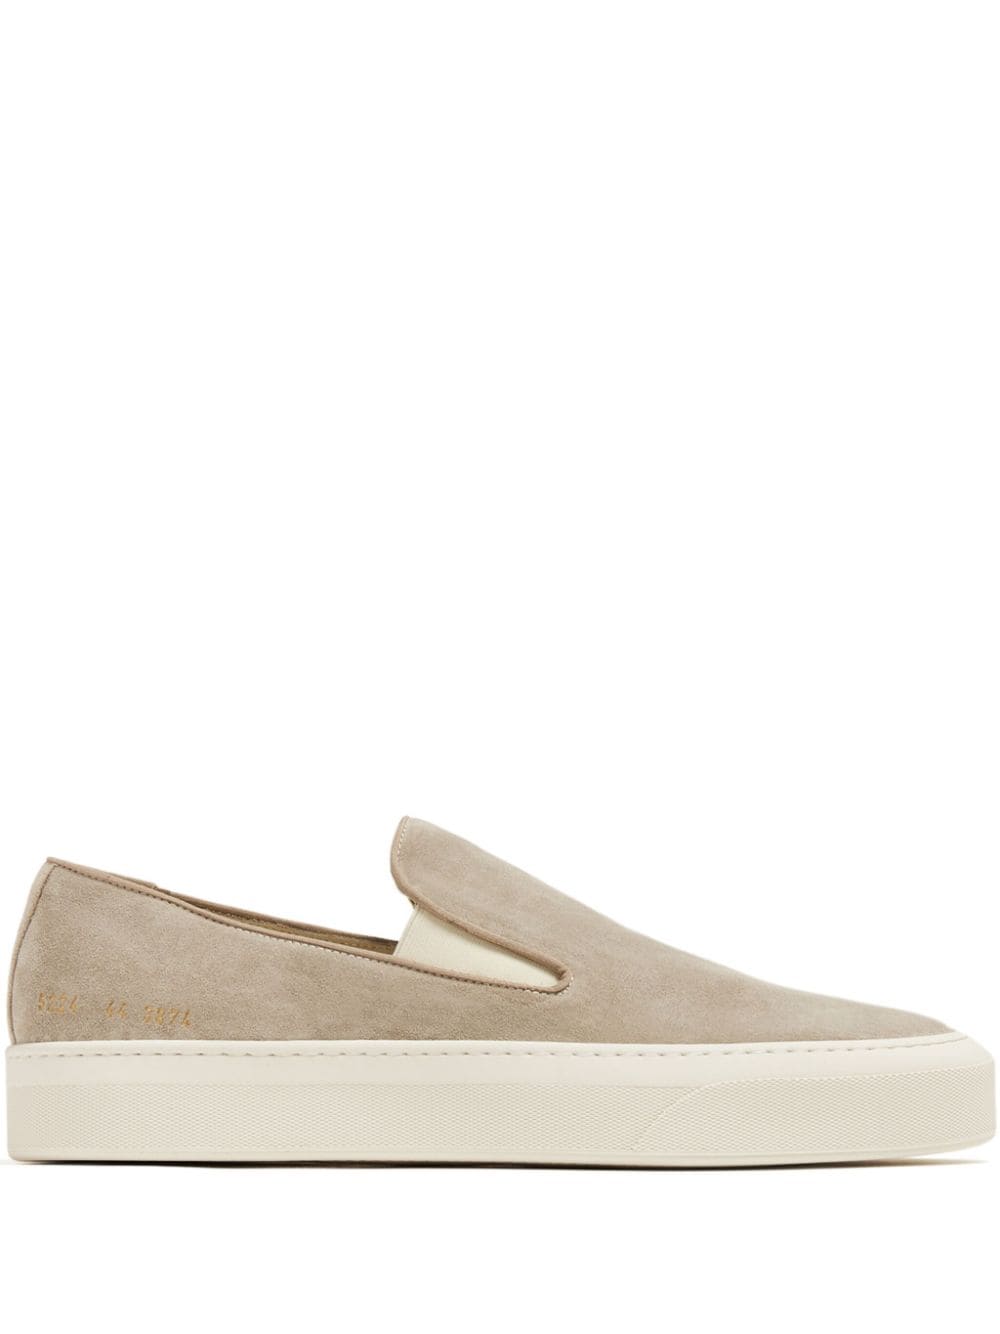 Common Projects suede slip-on sneakers - Neutrals von Common Projects